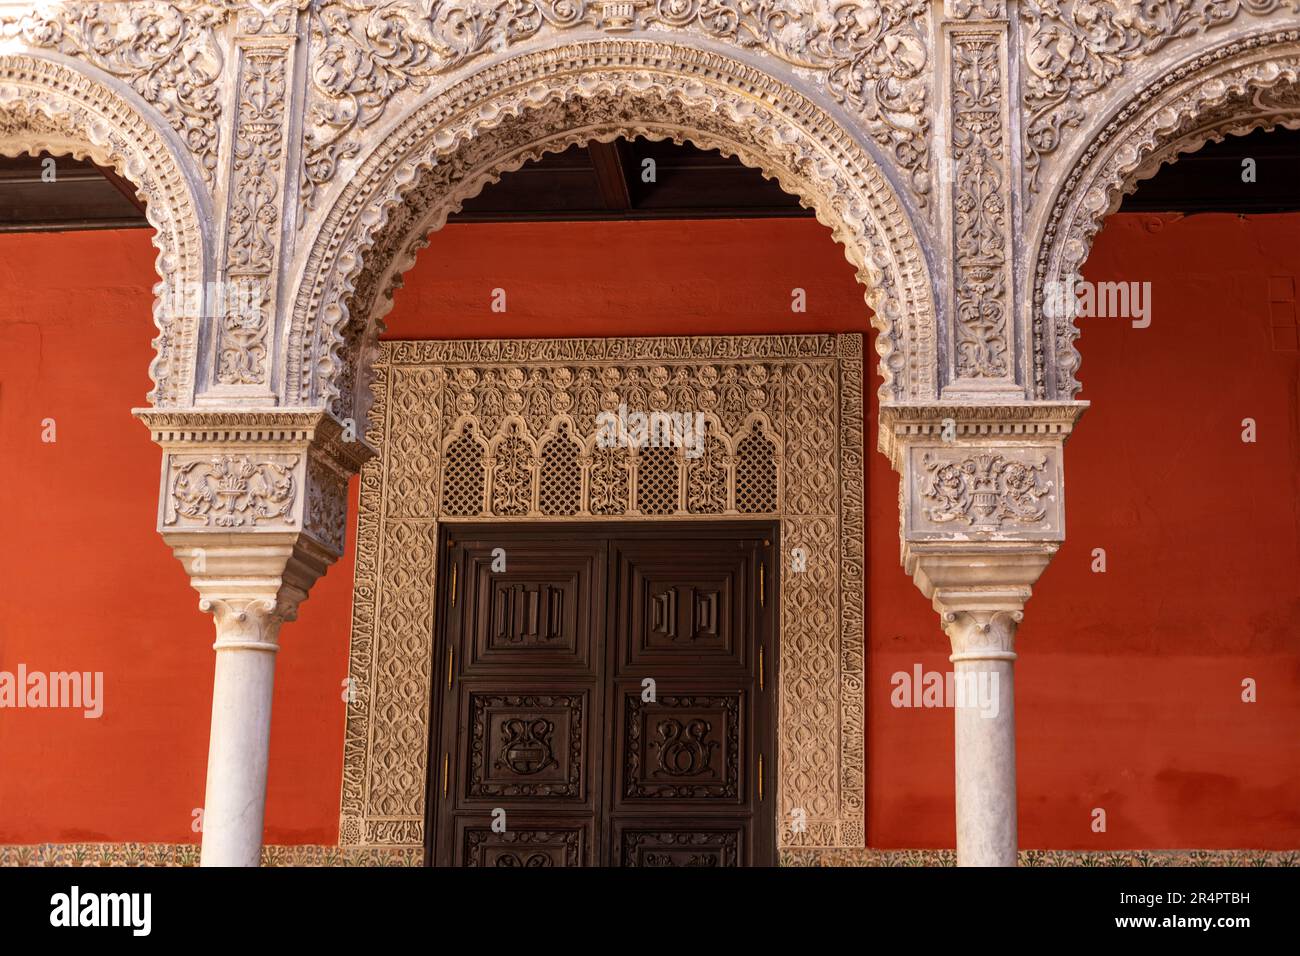 Spain, Seville, Andalusia, Casa de Salinas, 16th Century Palace, interior courtyard arches and doorway Stock Photo